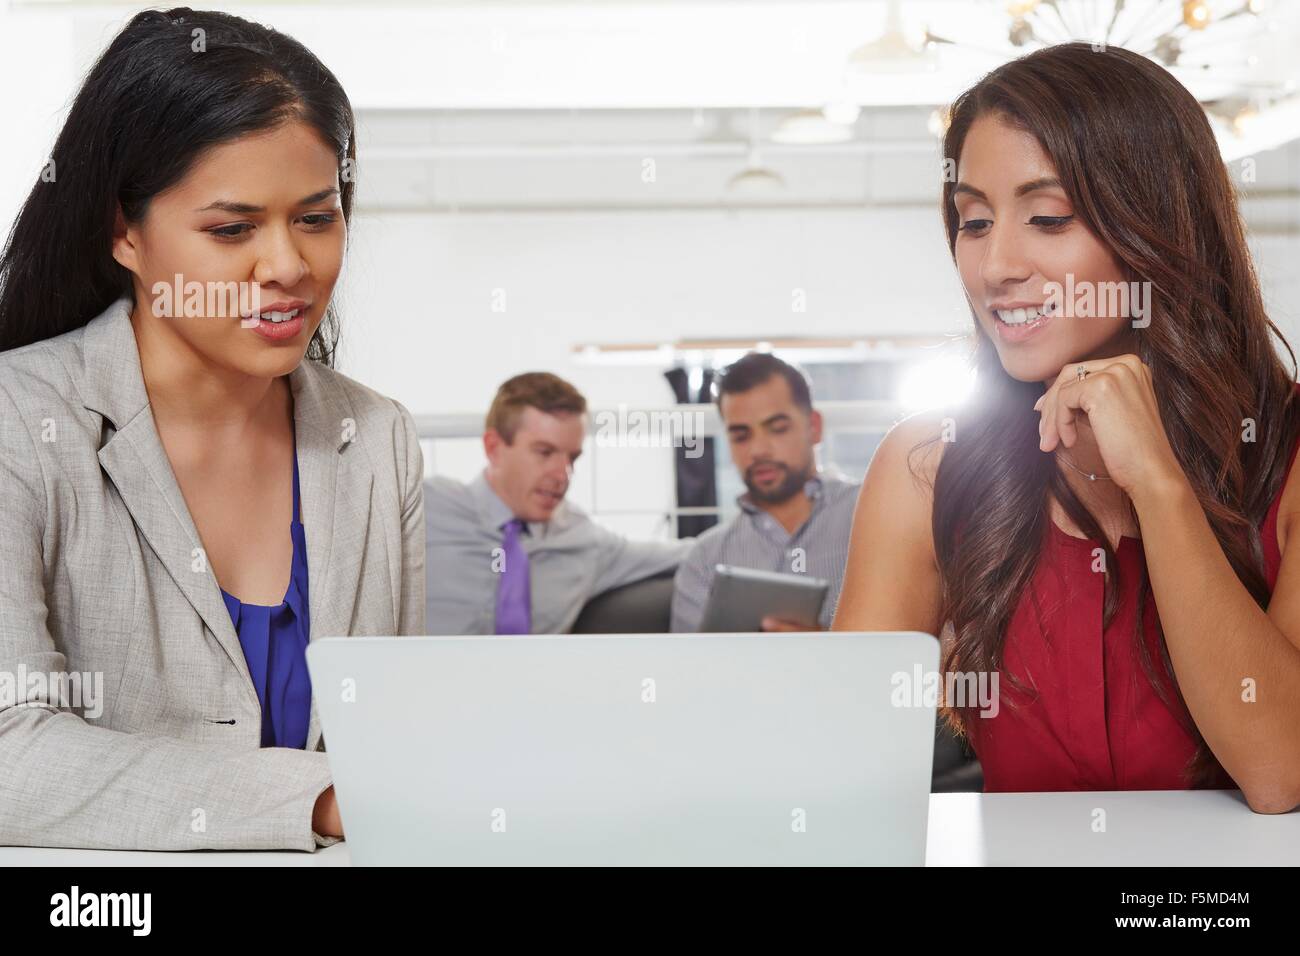 Two businesswomen sitting at desk, looking at laptop Banque D'Images